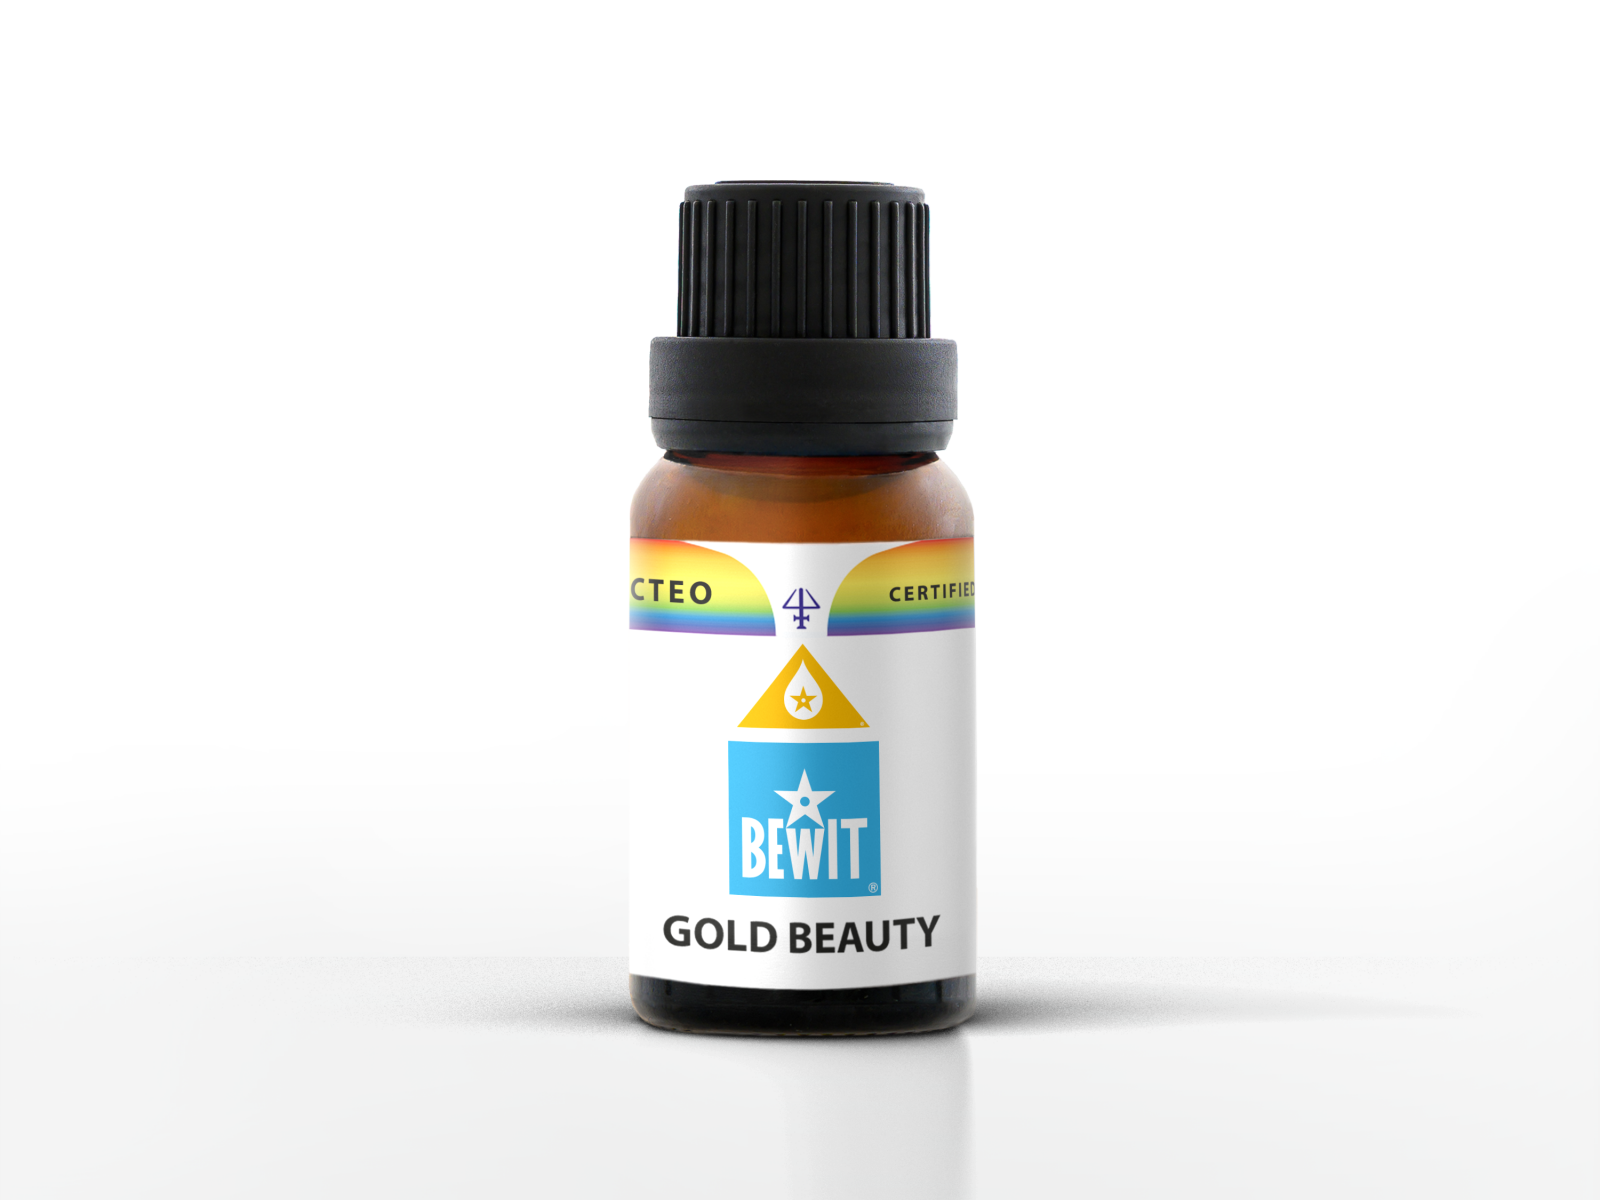 BEWIT GOLD BEAUTY - Blend of essential oils - 1